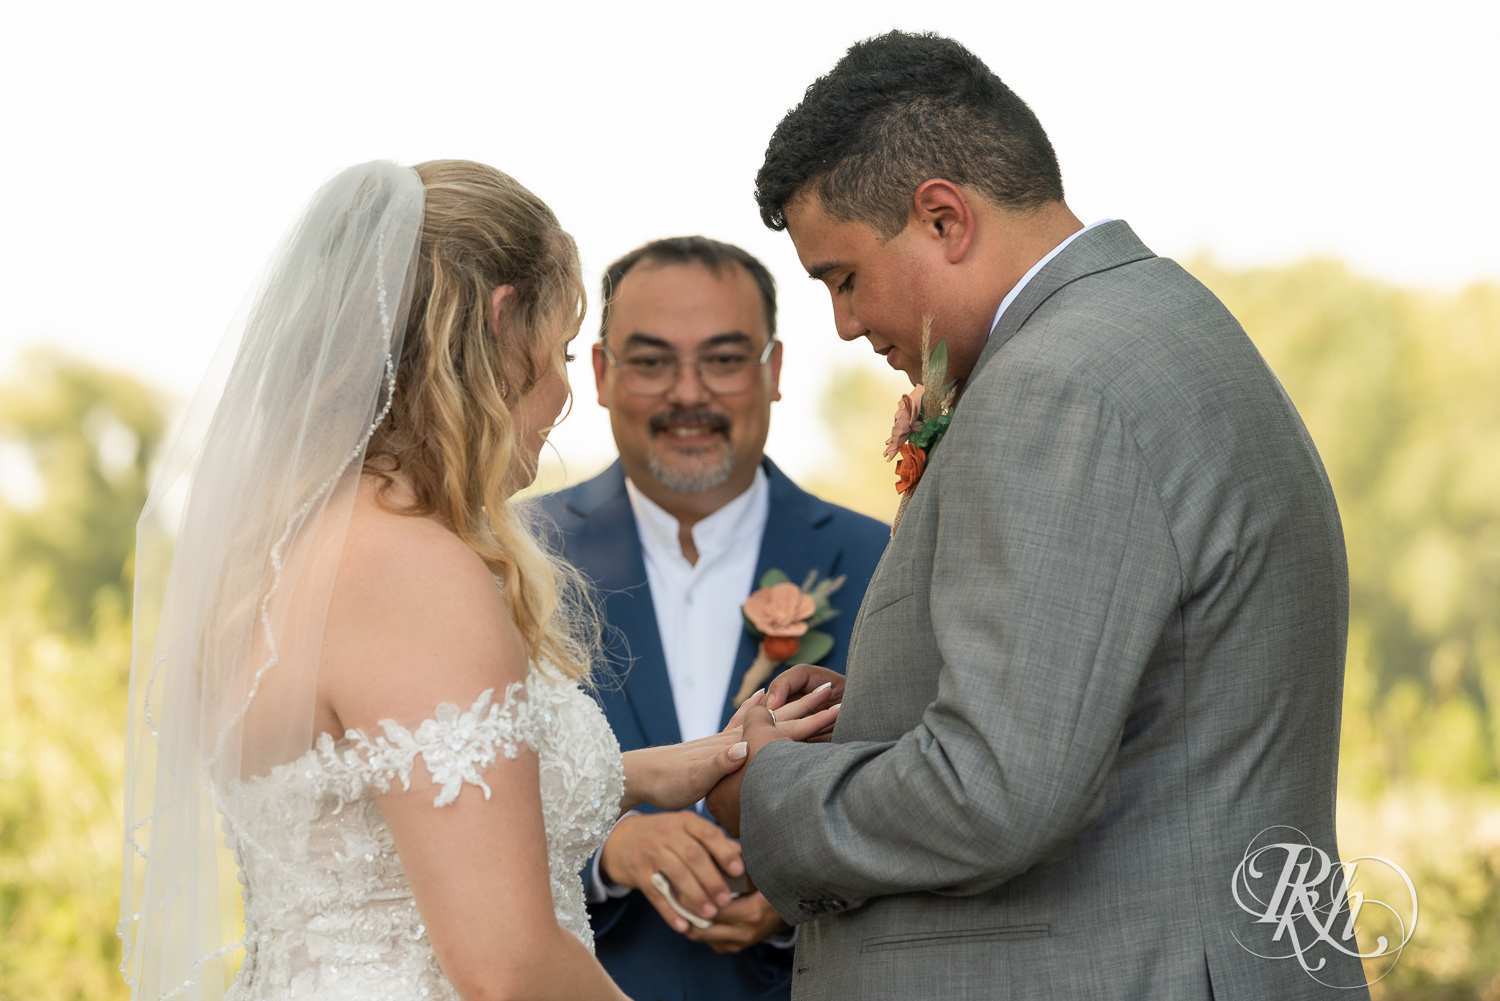 Bride and groom exchange rings during summer wedding ceremony at Cottage Farmhouse in Glencoe, Minnesota.